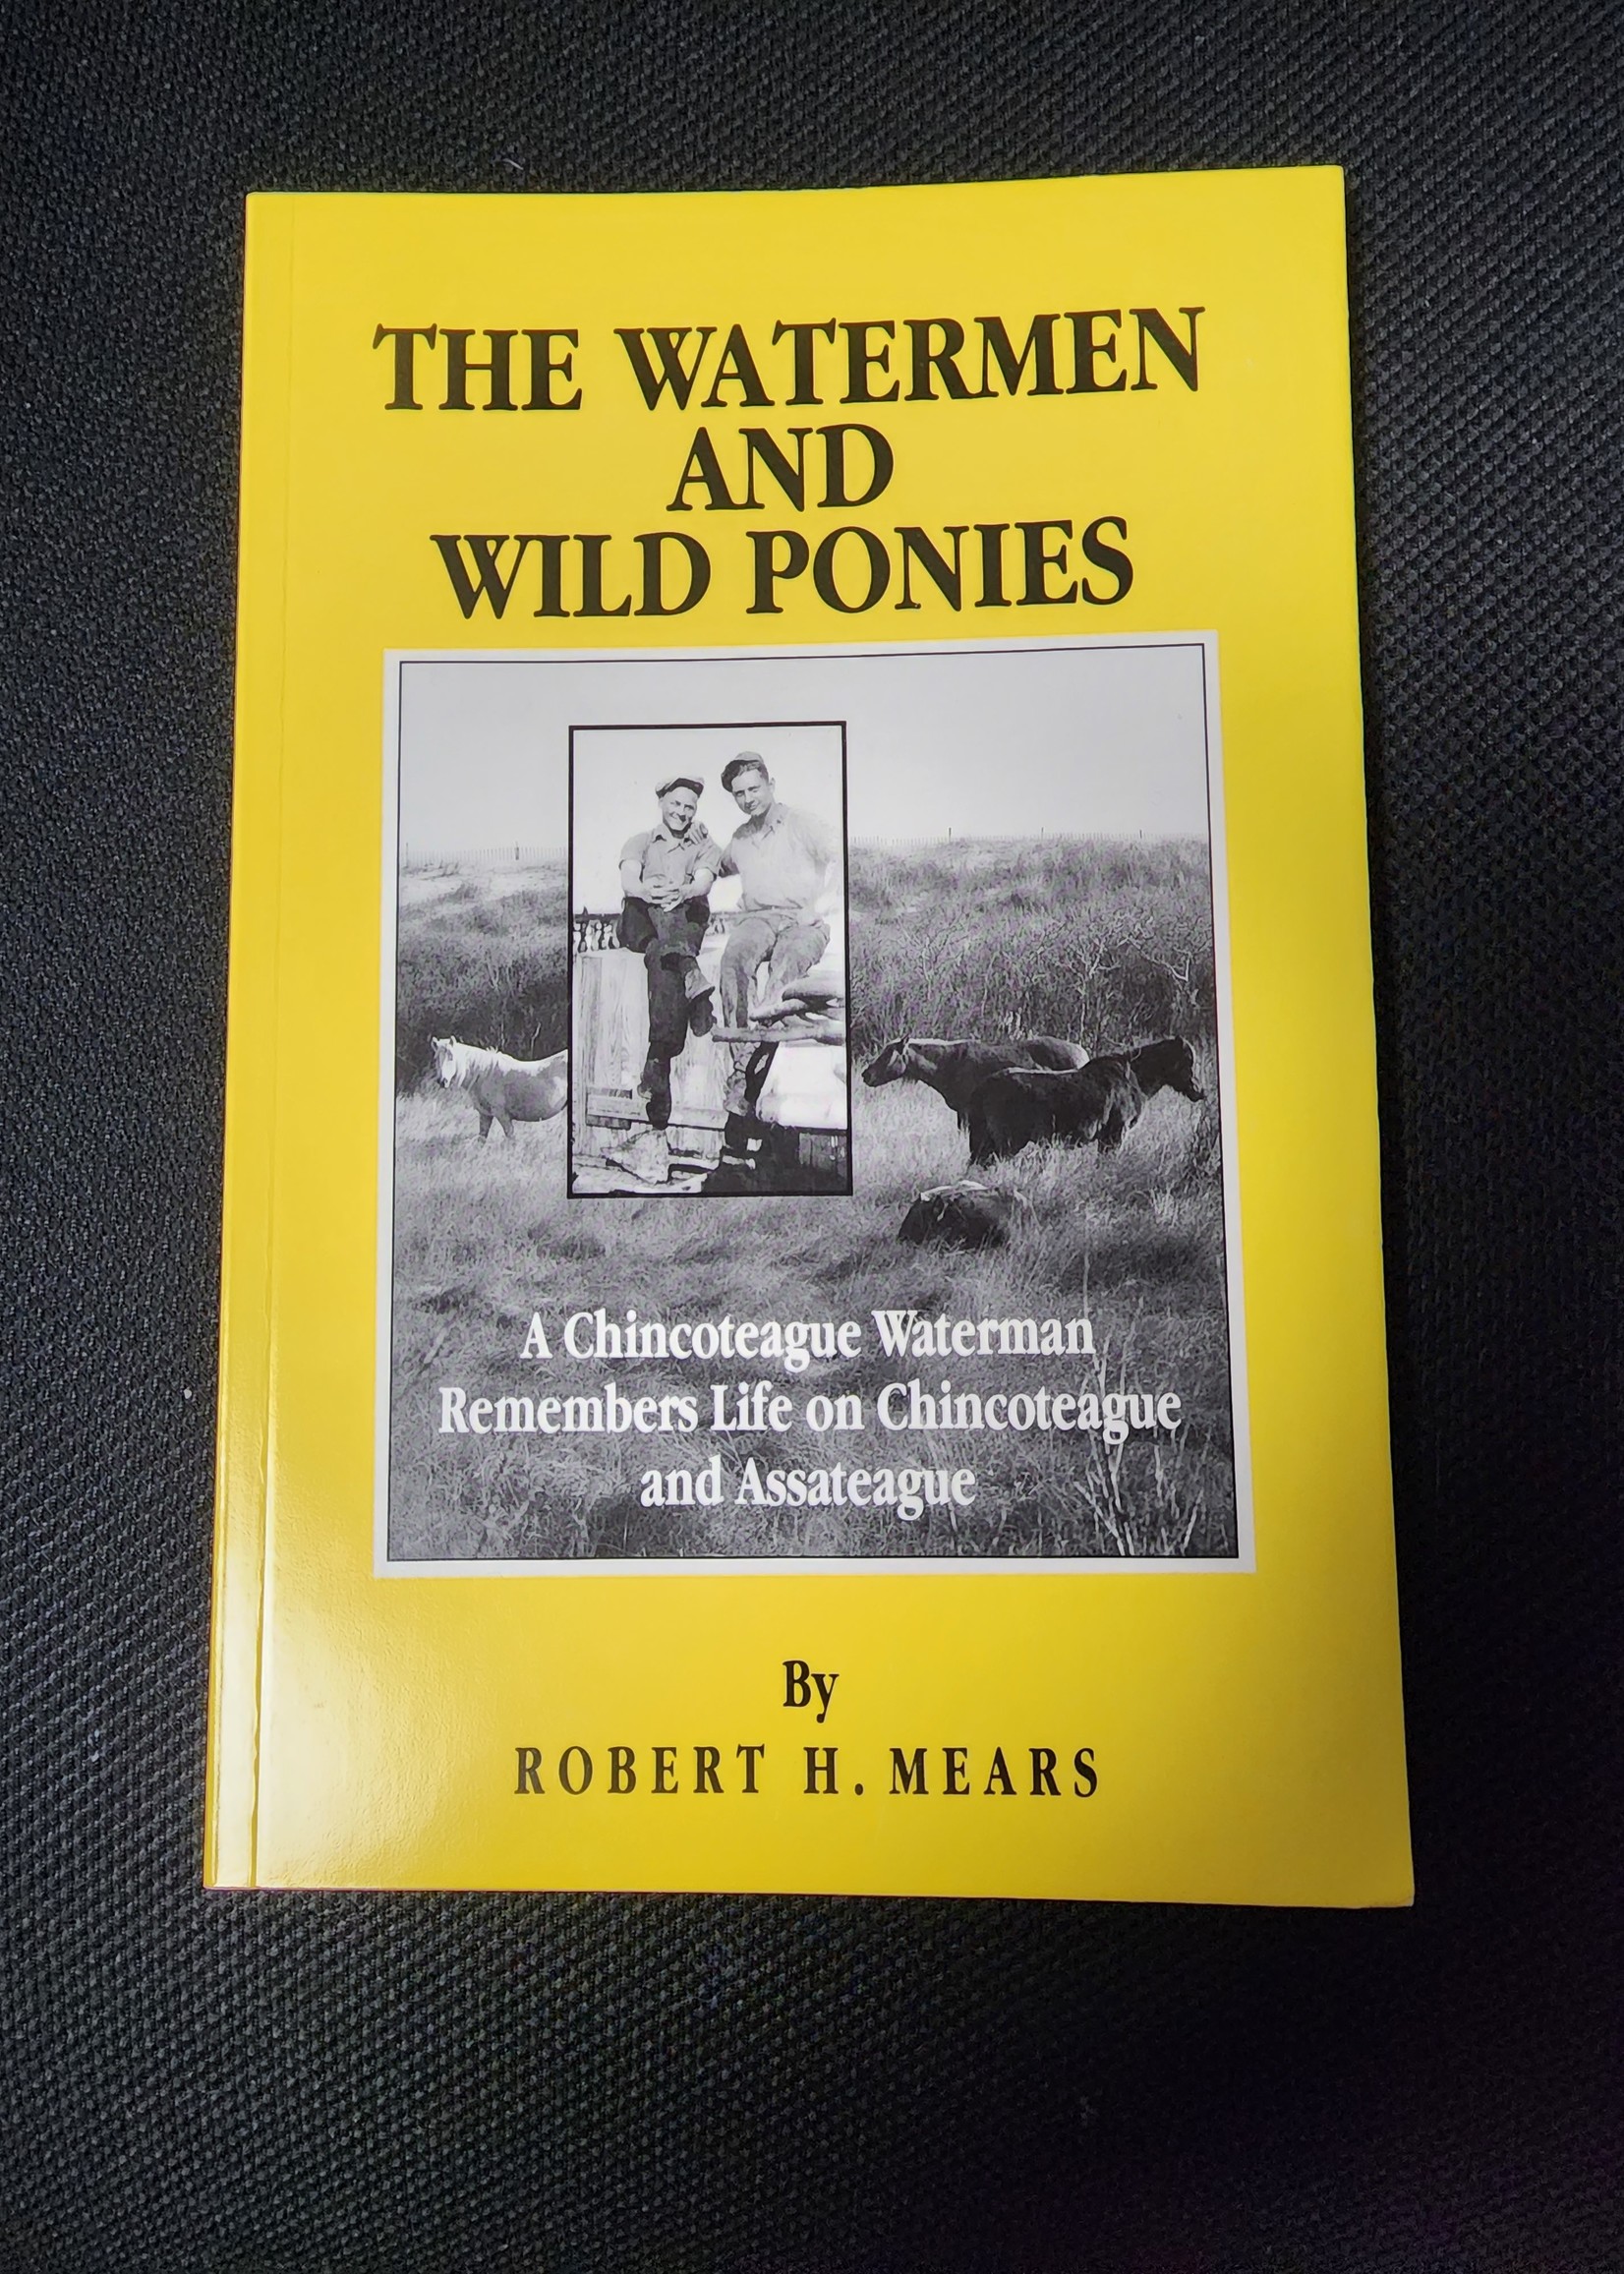 Watermen and Wild Ponies: A Chincoteague Waterman Remembers Life on Chincoteague and Assateague